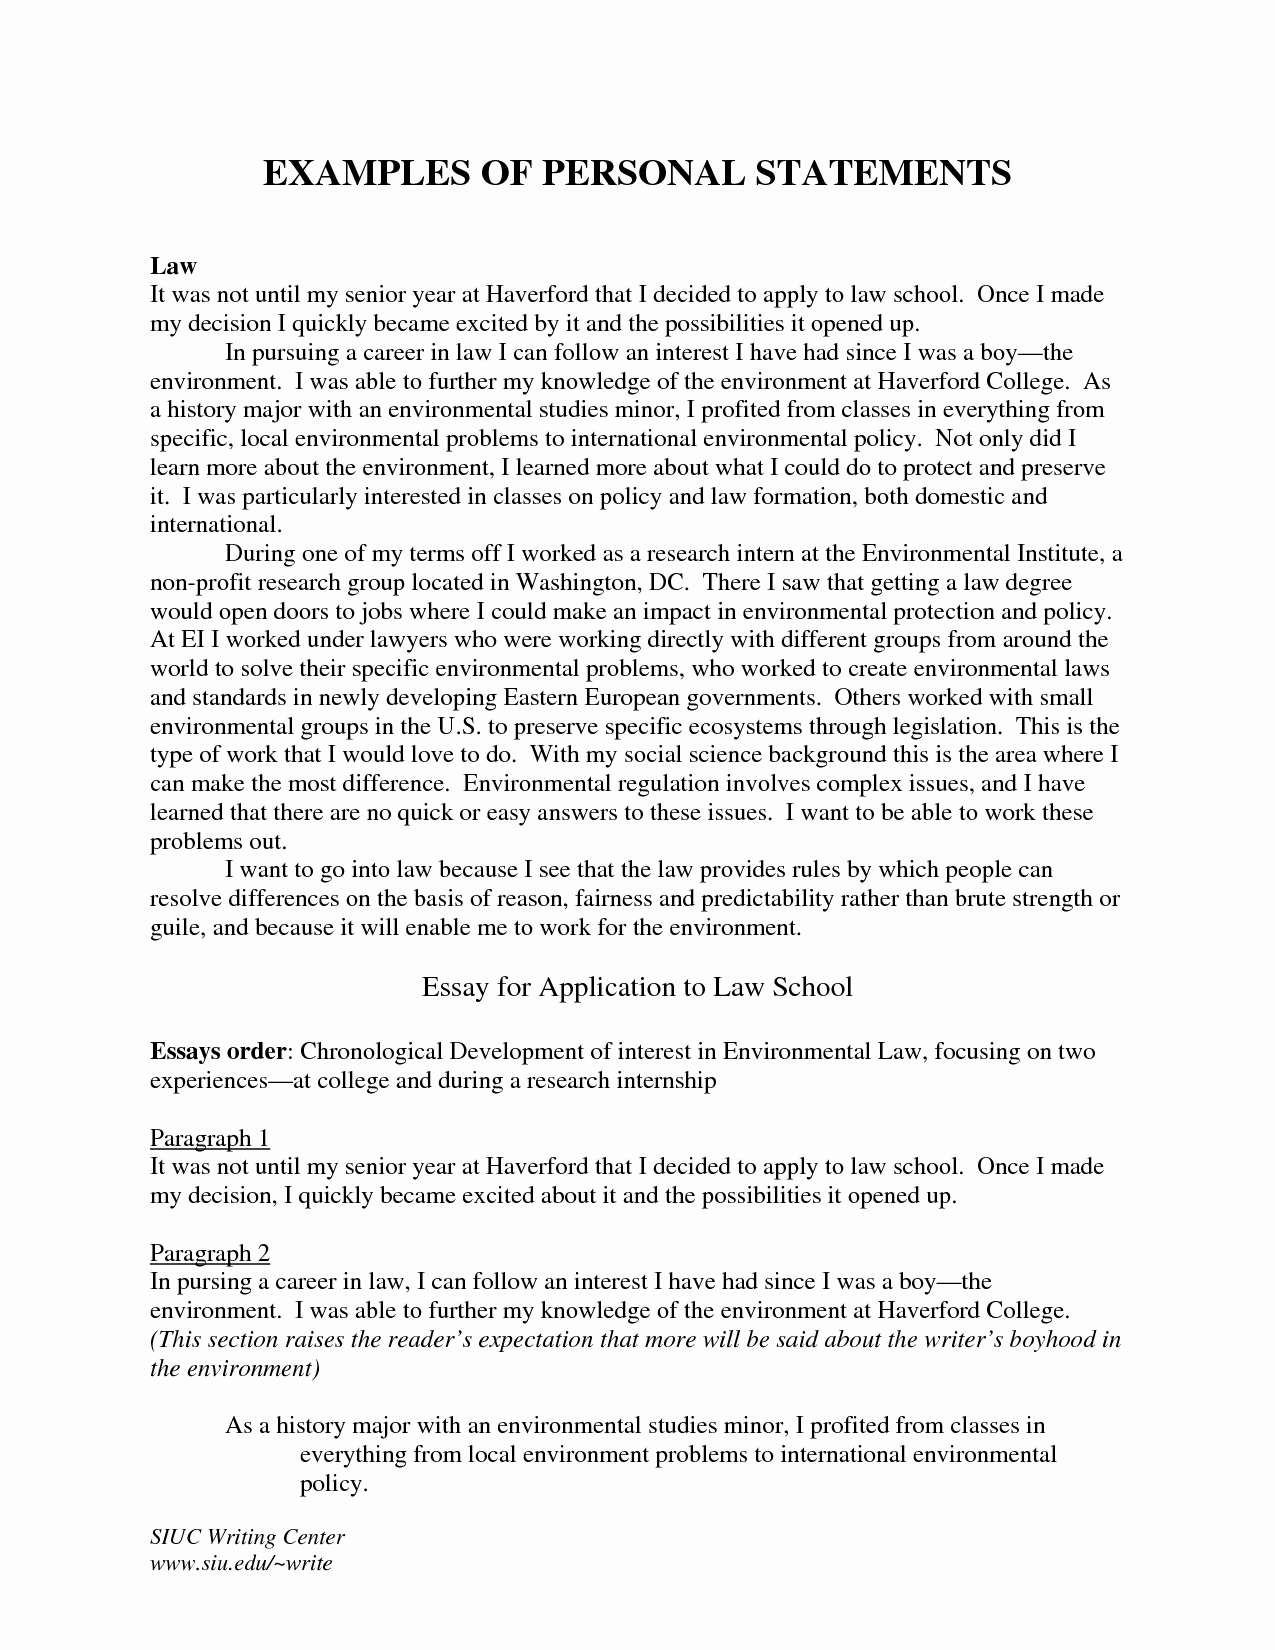 Personal History Statement Samples Awesome Sample Personal Statement for Graduate School In History